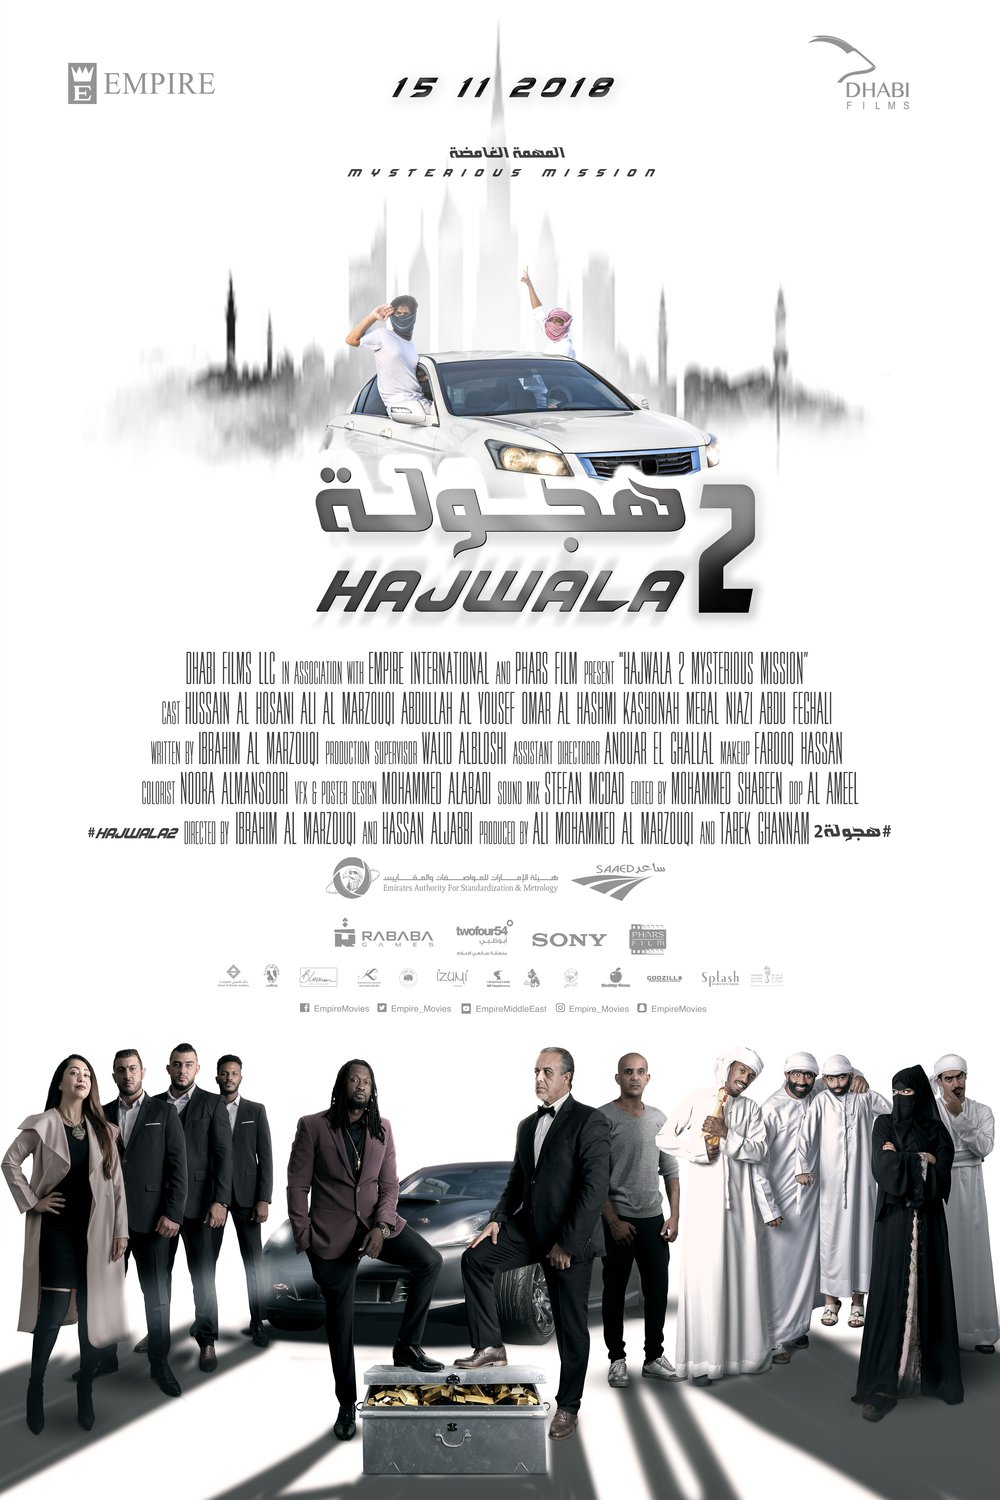 Arabic poster of the movie Hajwala 2: Mysterious Mission